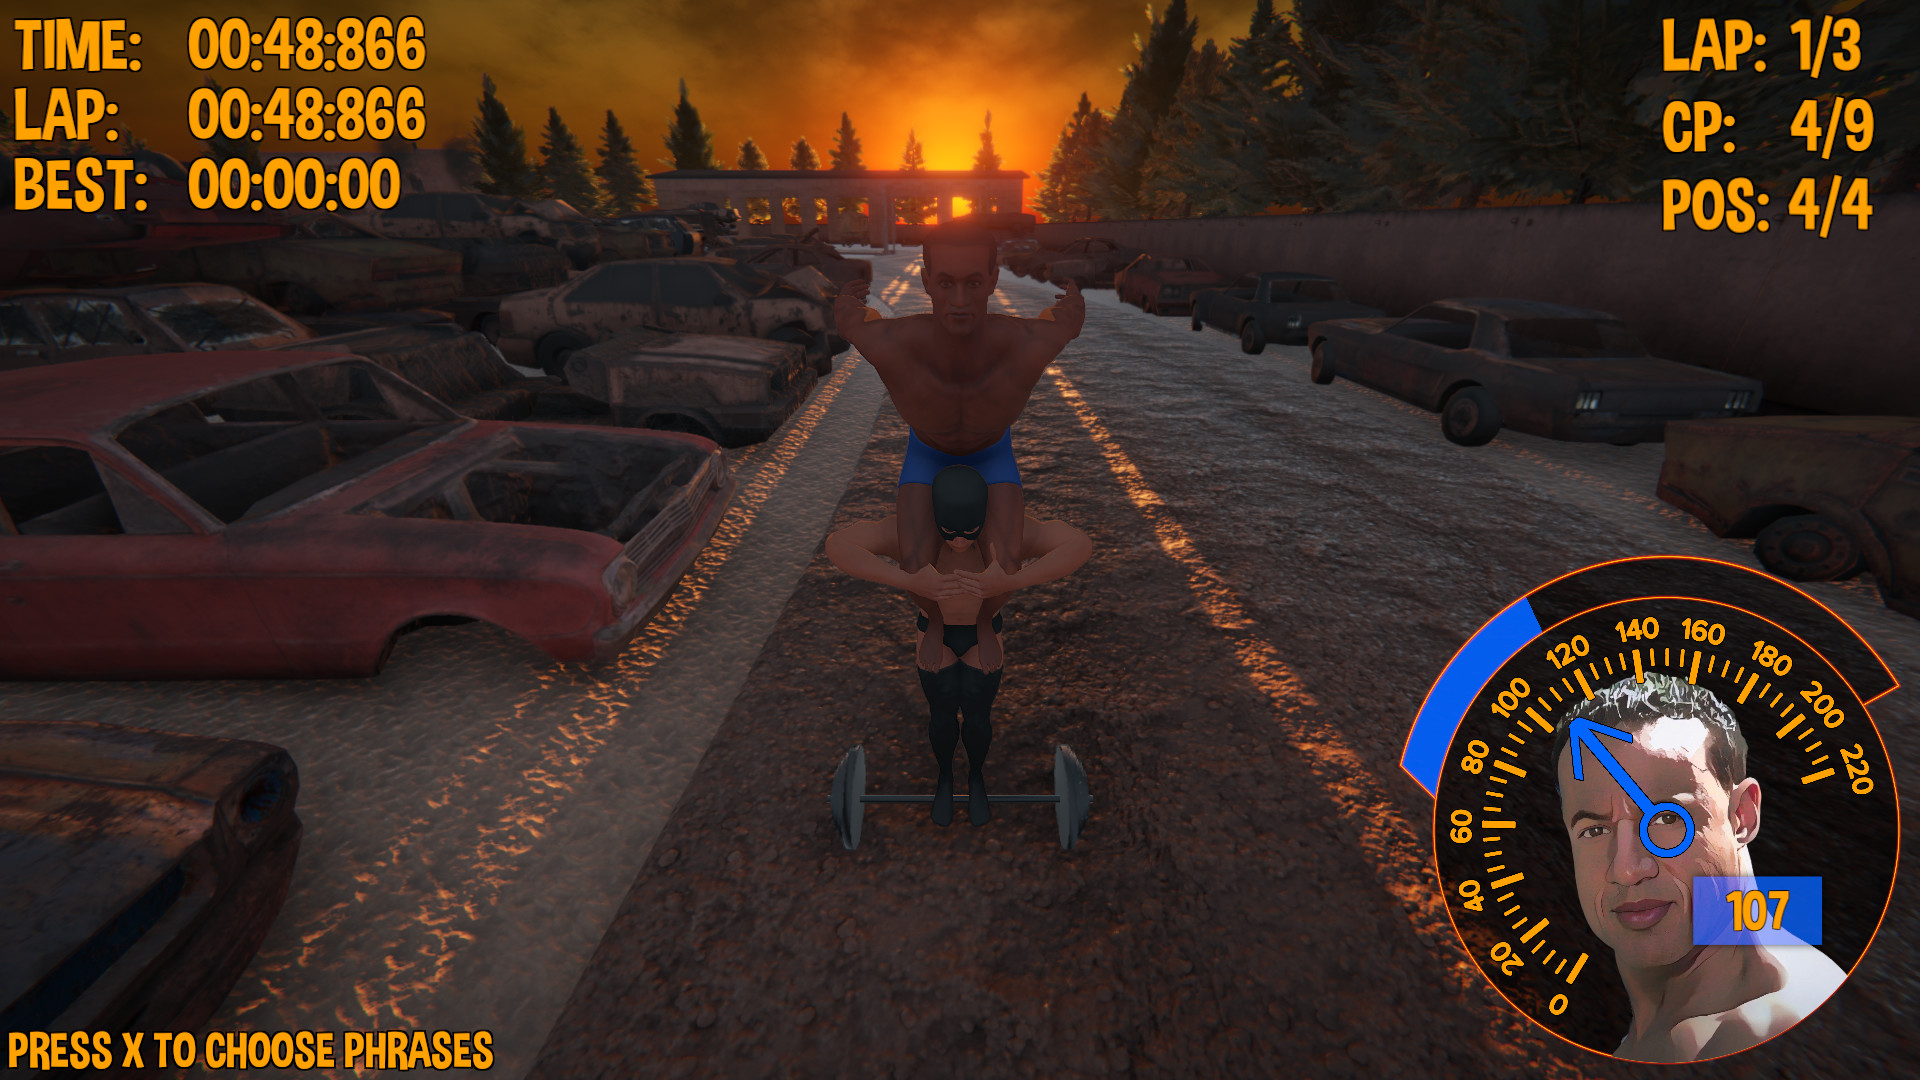 Ultimate Muscle Roller Championship Steam CD Key